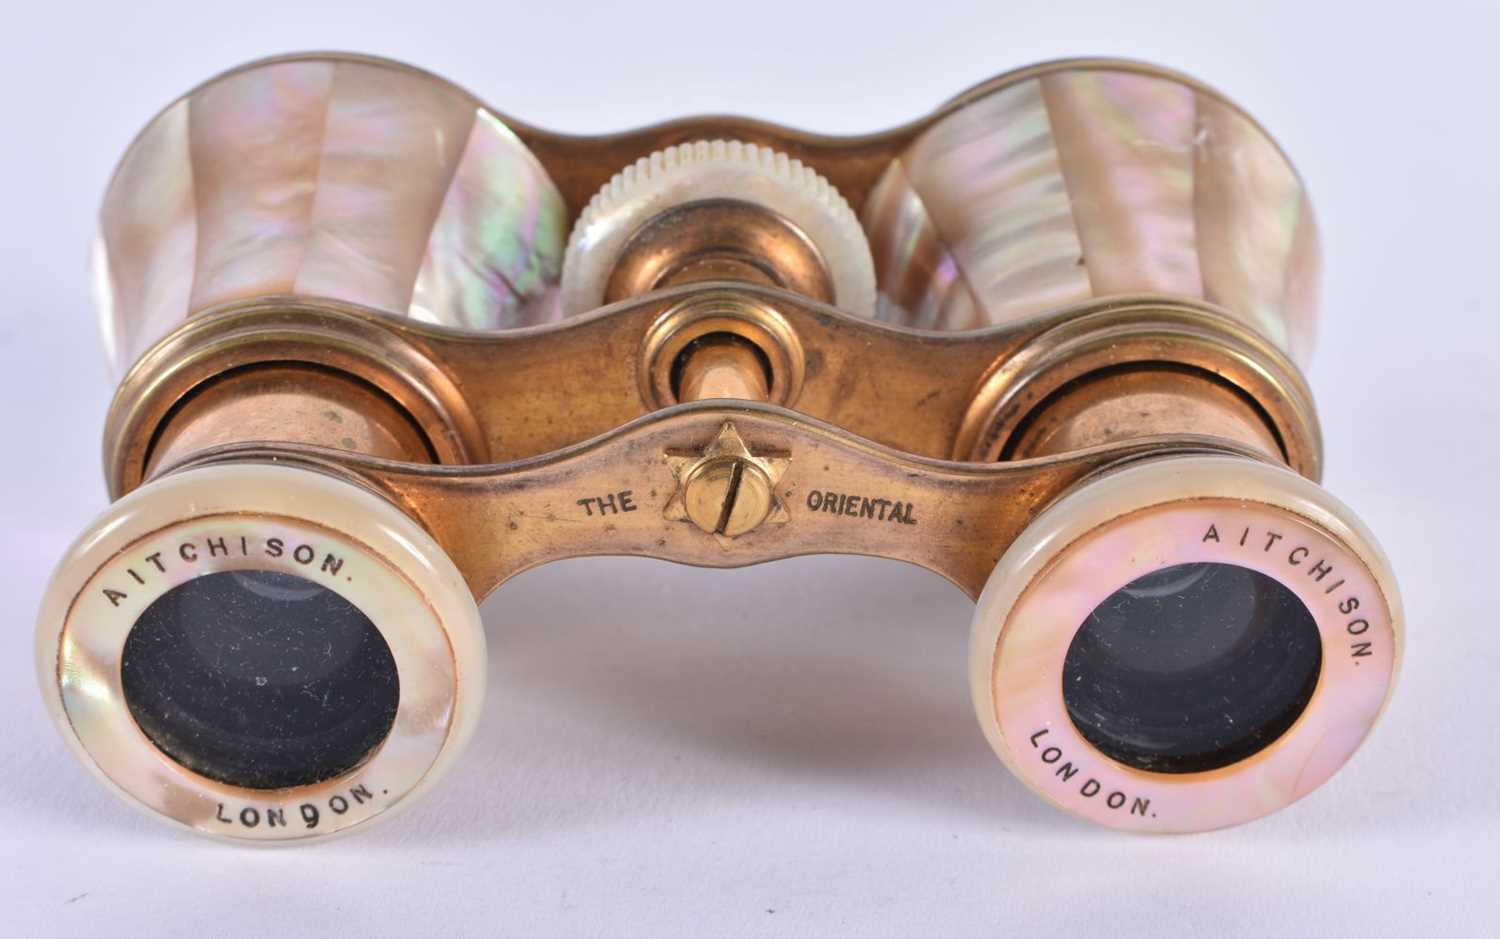 A PAIR OF MOTHER OF PEARL OPERA GLASSES. 9 cm x 8 cm extended. - Image 3 of 4